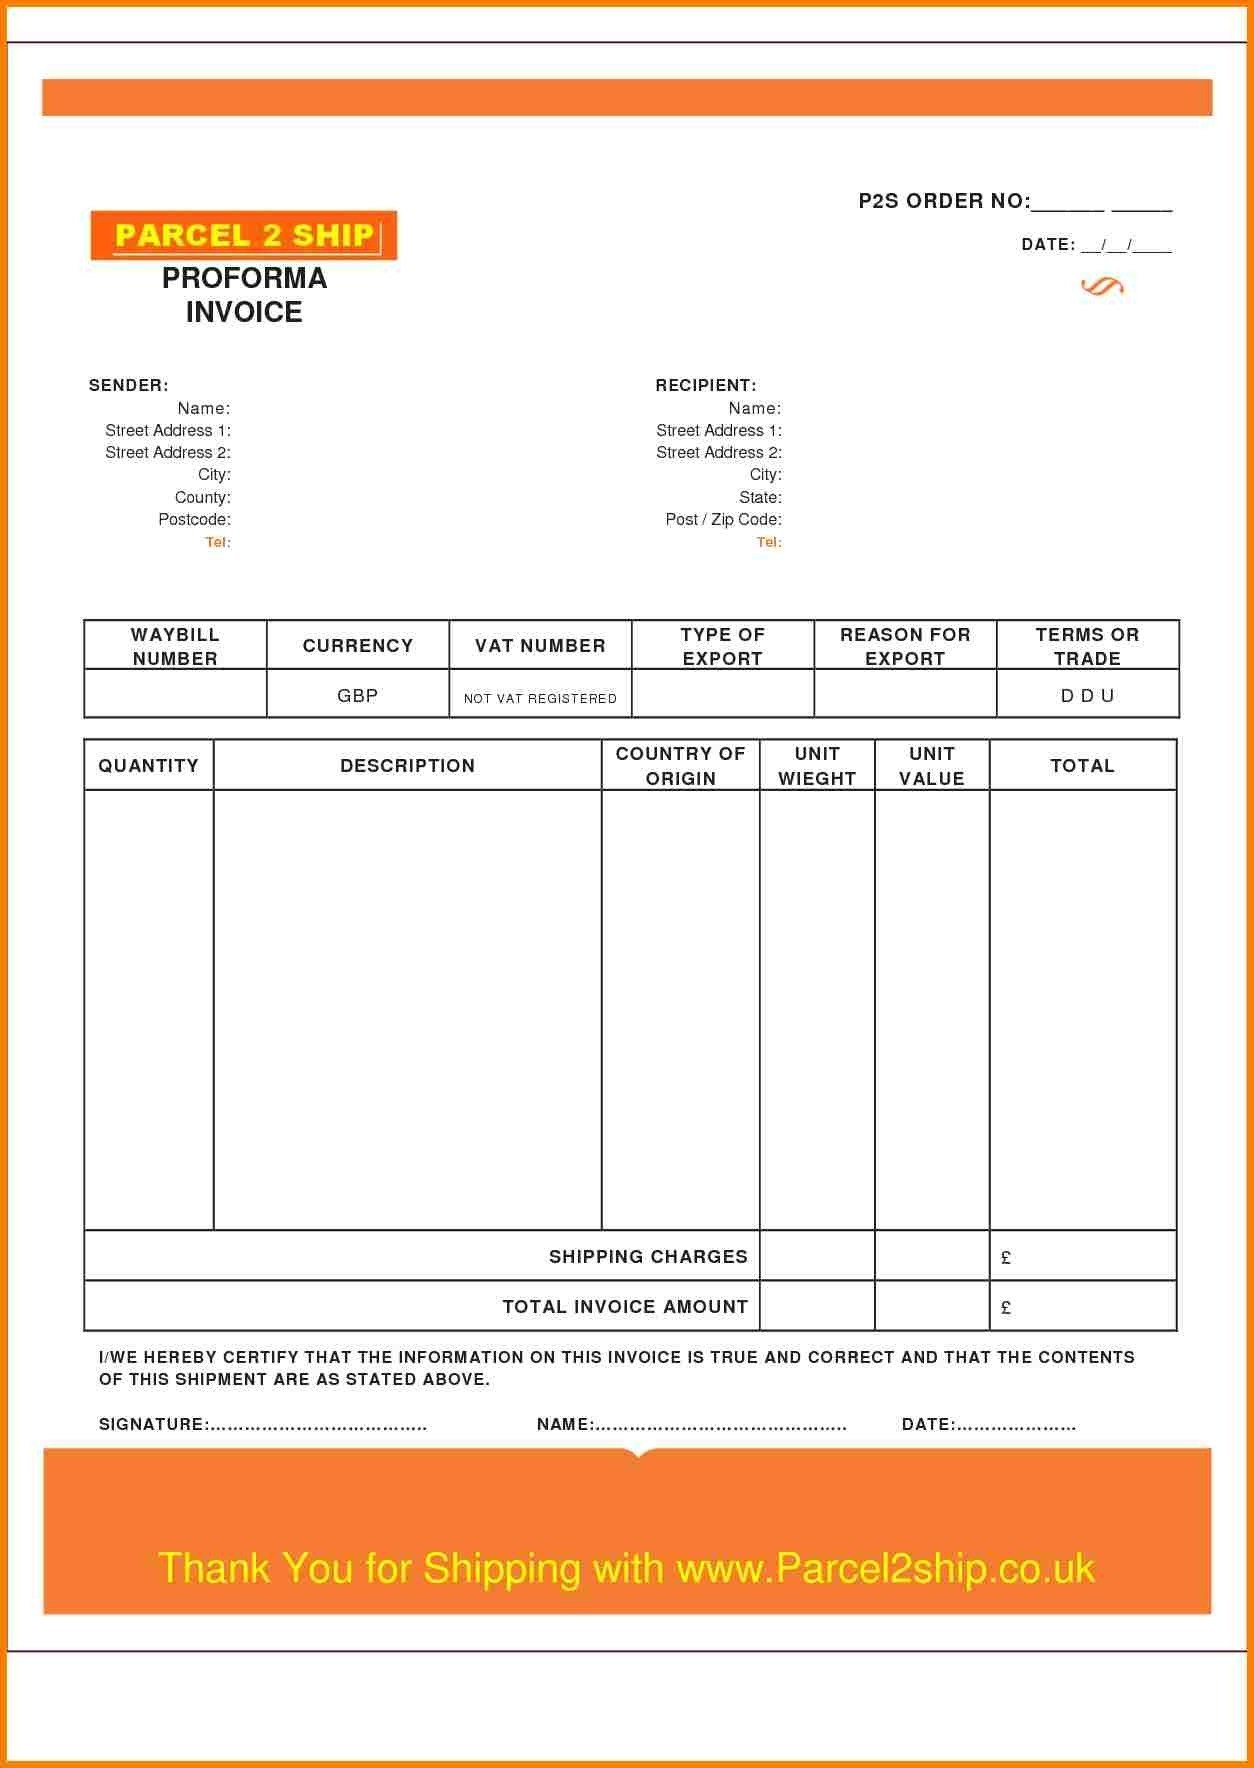 Invoice Template Filetype Doc  Letsgonepal with regard to Invoice Template Filetype Doc